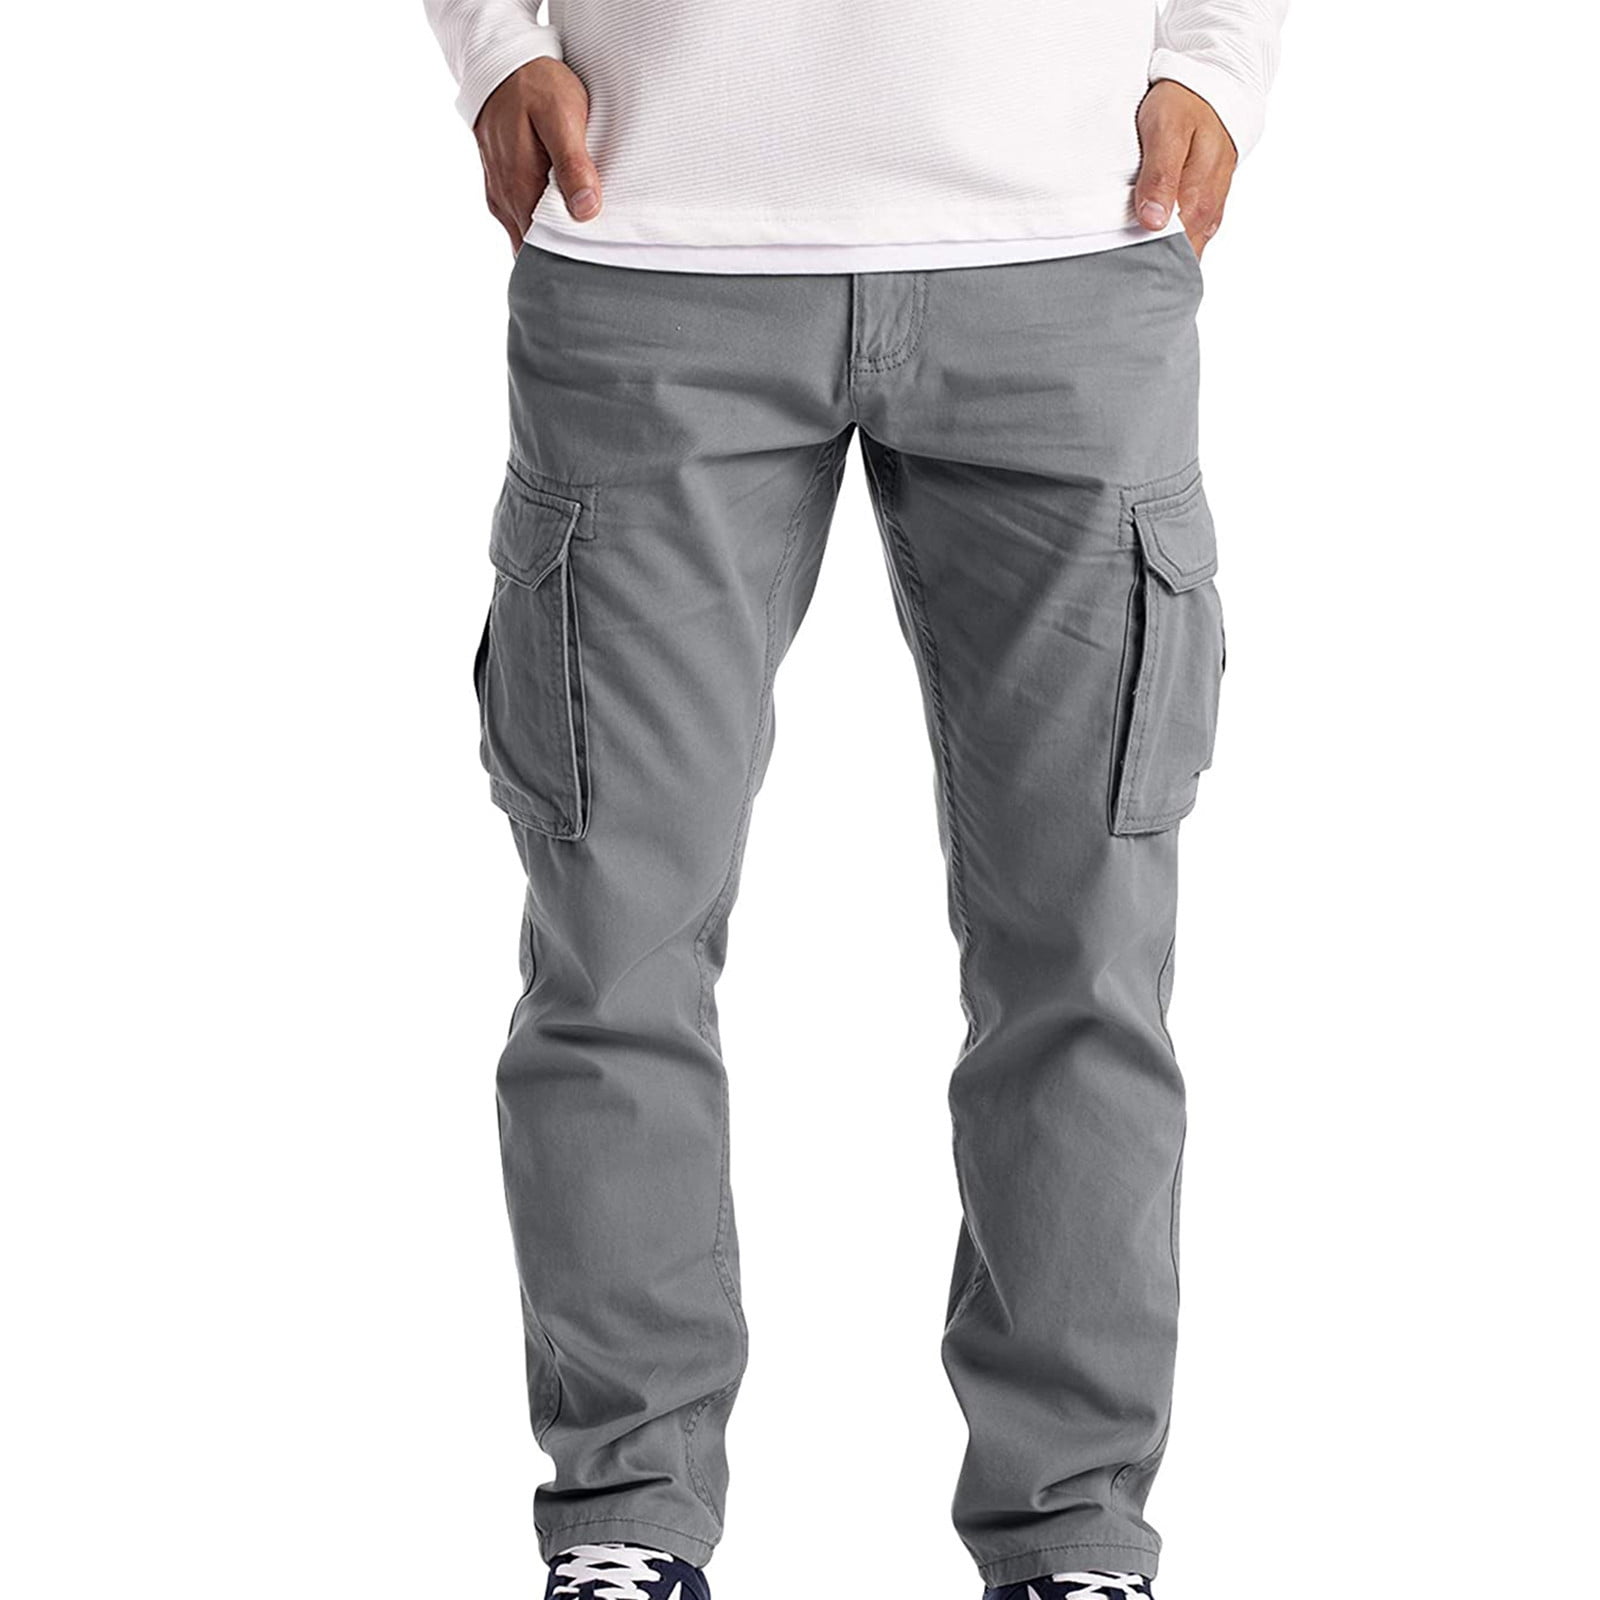 Ayolanni Gray Cargo Pants Men Fashion Cargo Mens Casual Solid Loose Sport  Pockets Long Pants Trousers 5x  Walmartcom